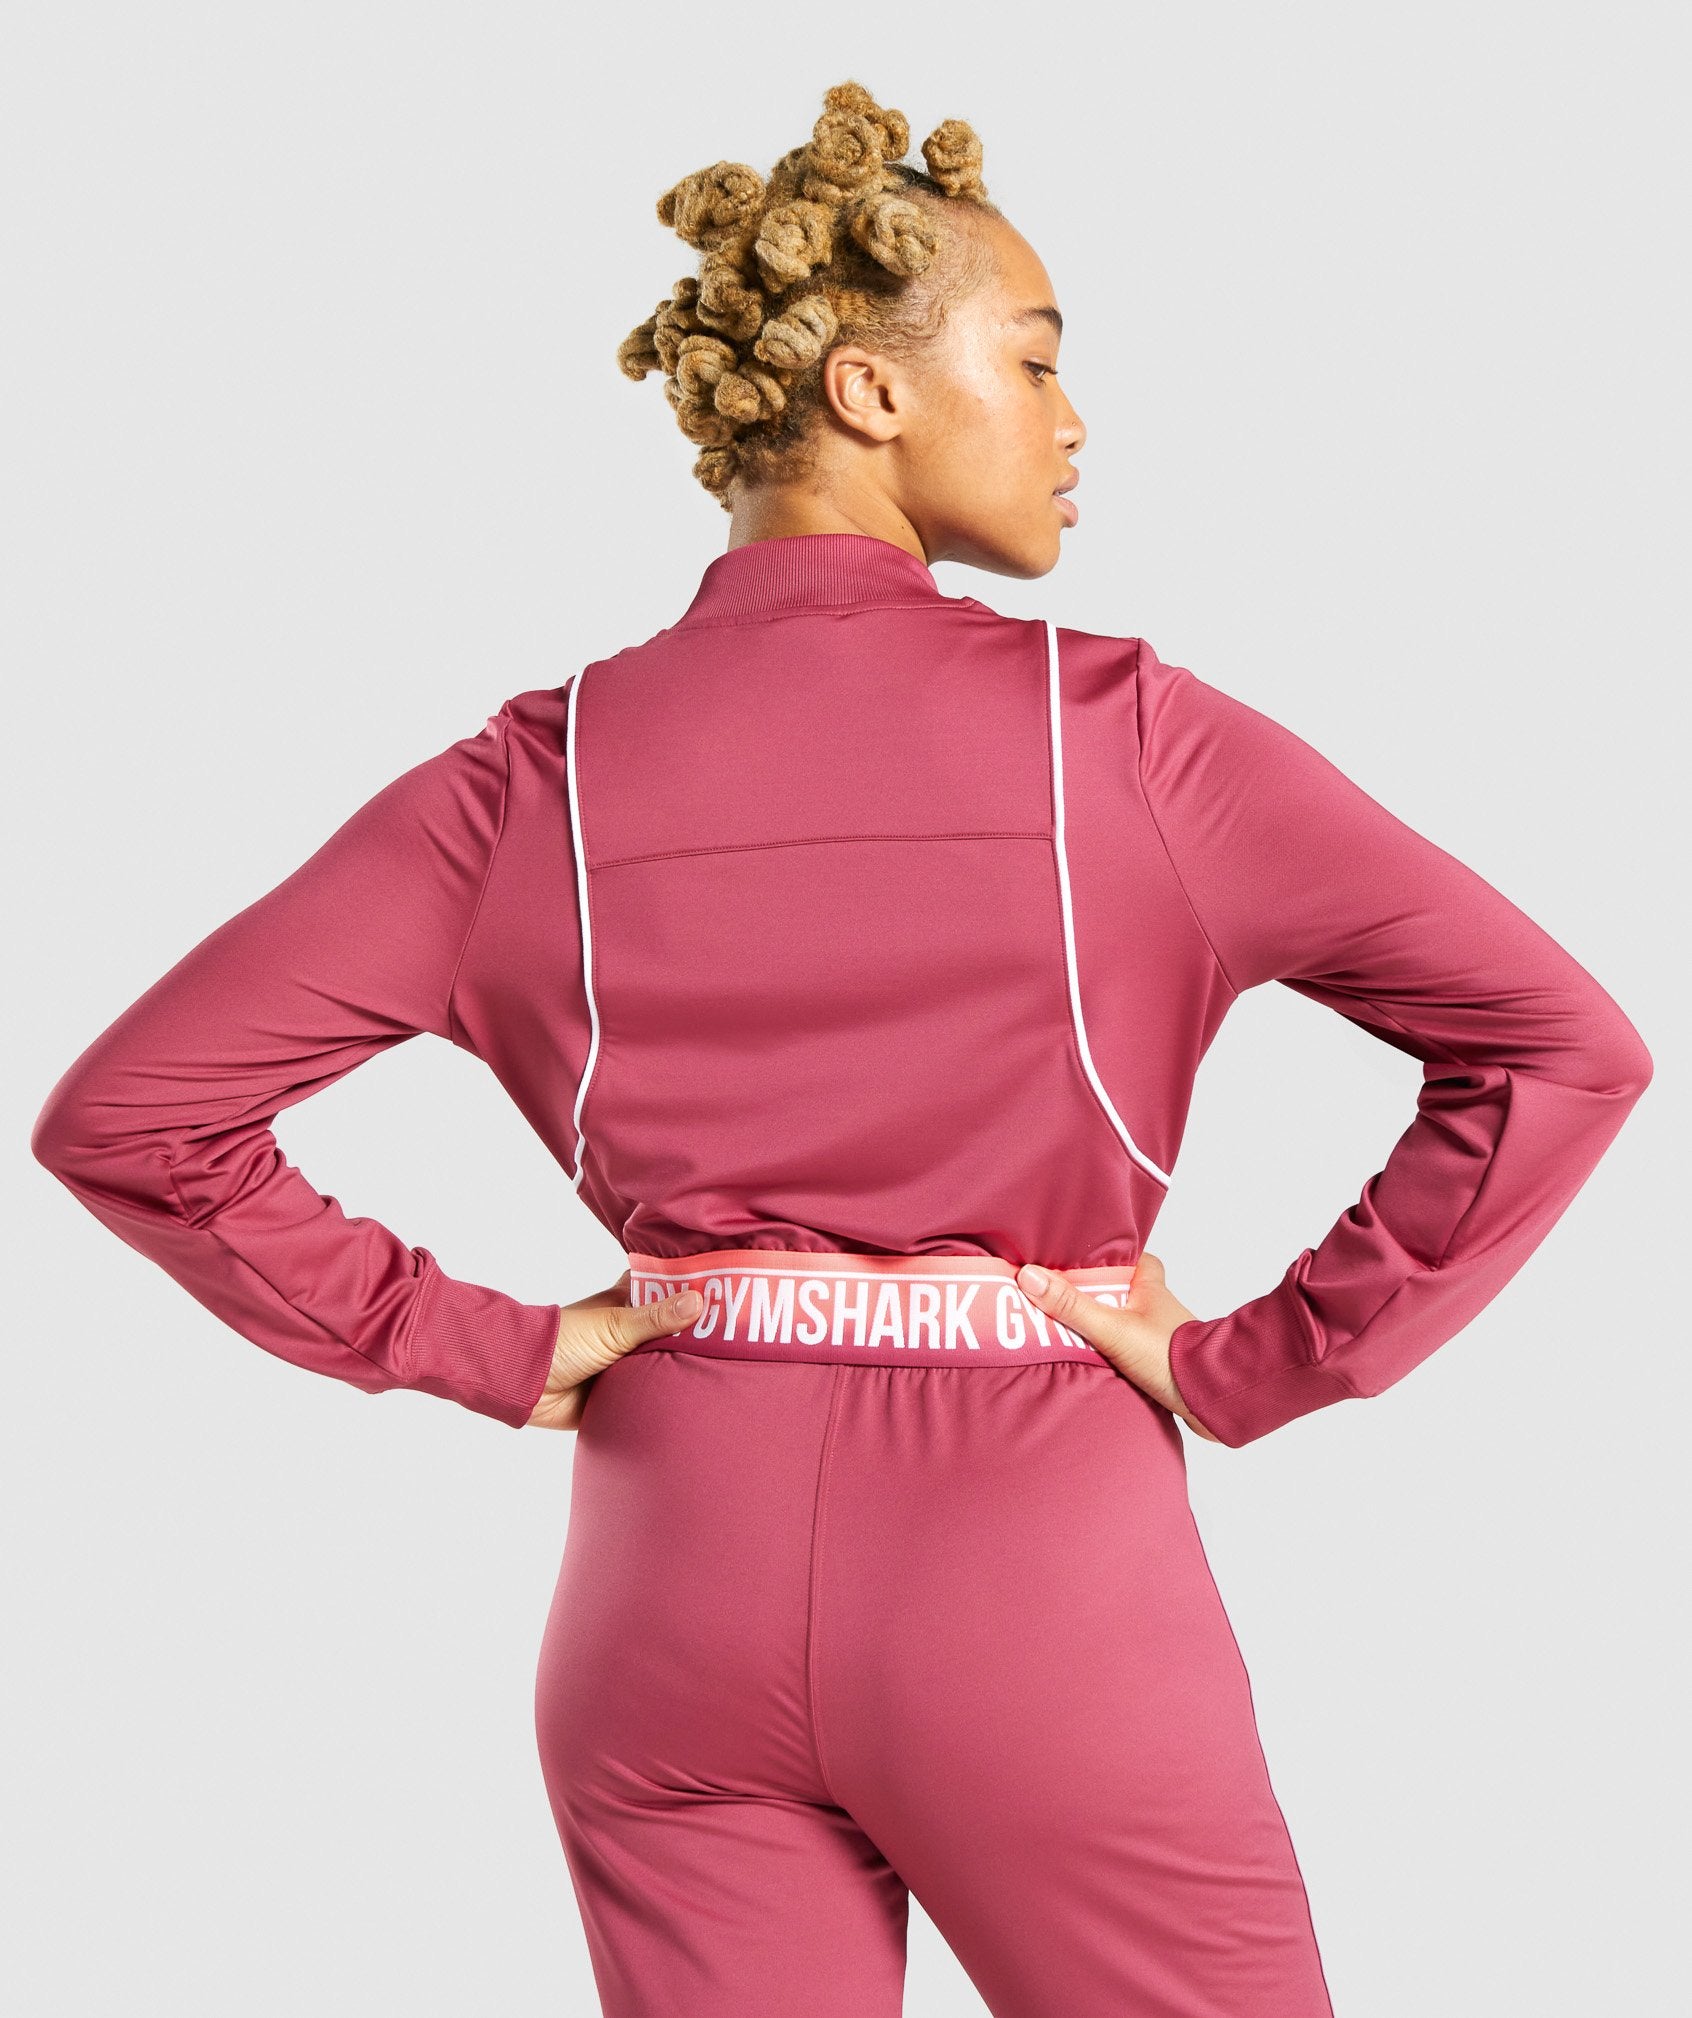 Gymshark Recess Hoodie Pink - $35 (30% Off Retail) New With Tags